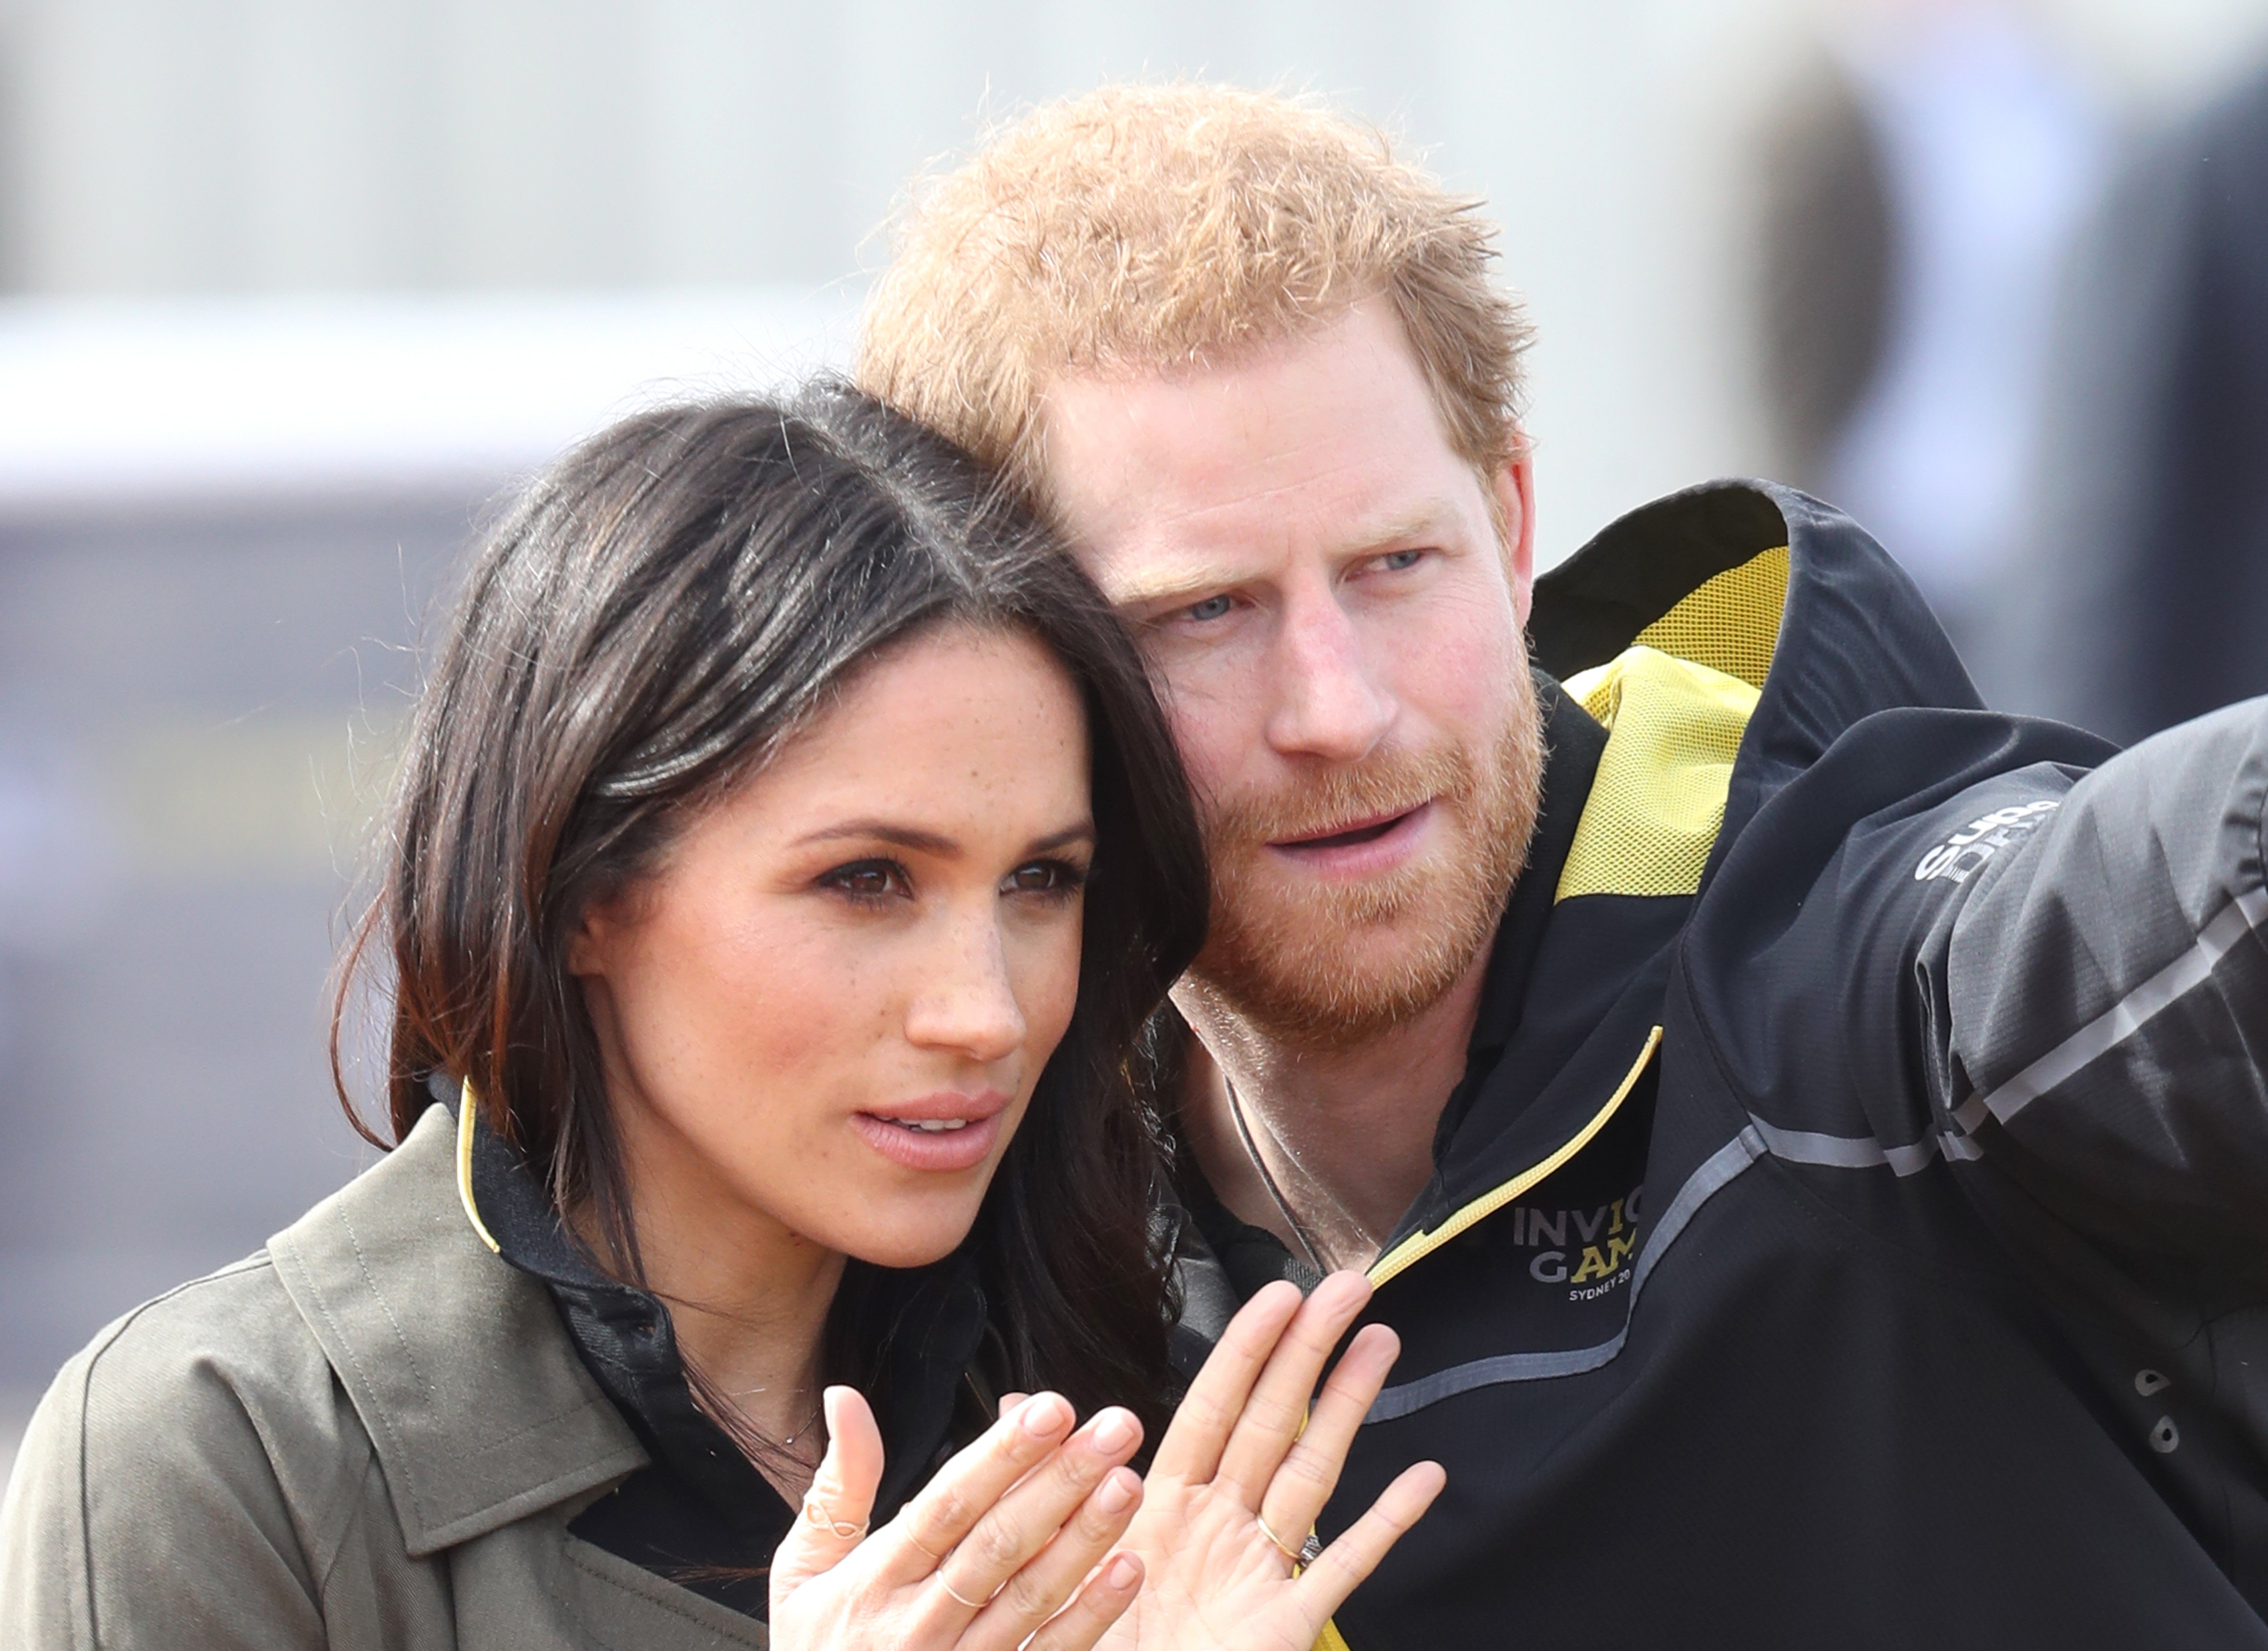 Prince Harry and Meghan Markle attending the UK team trials for The Invictus Games Sydney 2018  in Bath, England. | Photo: Getty Images